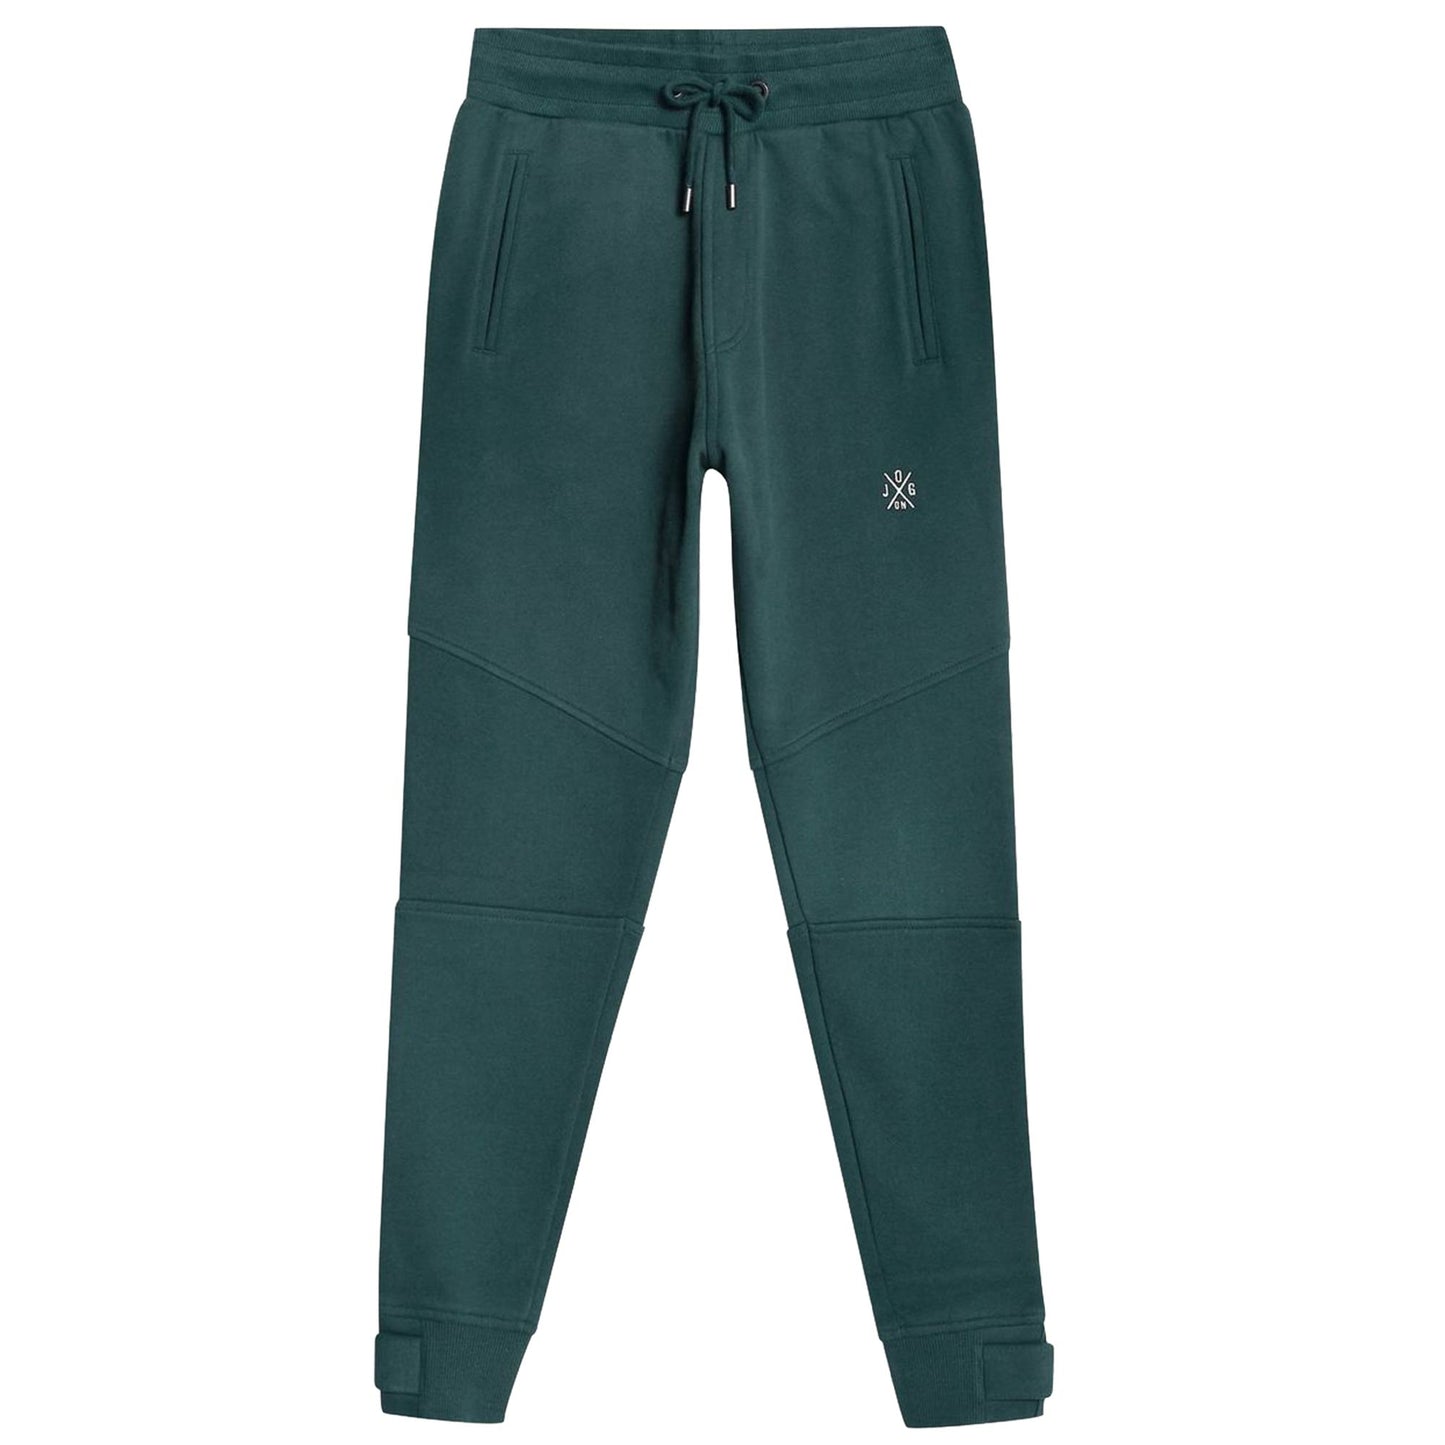 Casual Gym Fitness Tracksuit Bottoms Slim Fit Jade Green Joggers